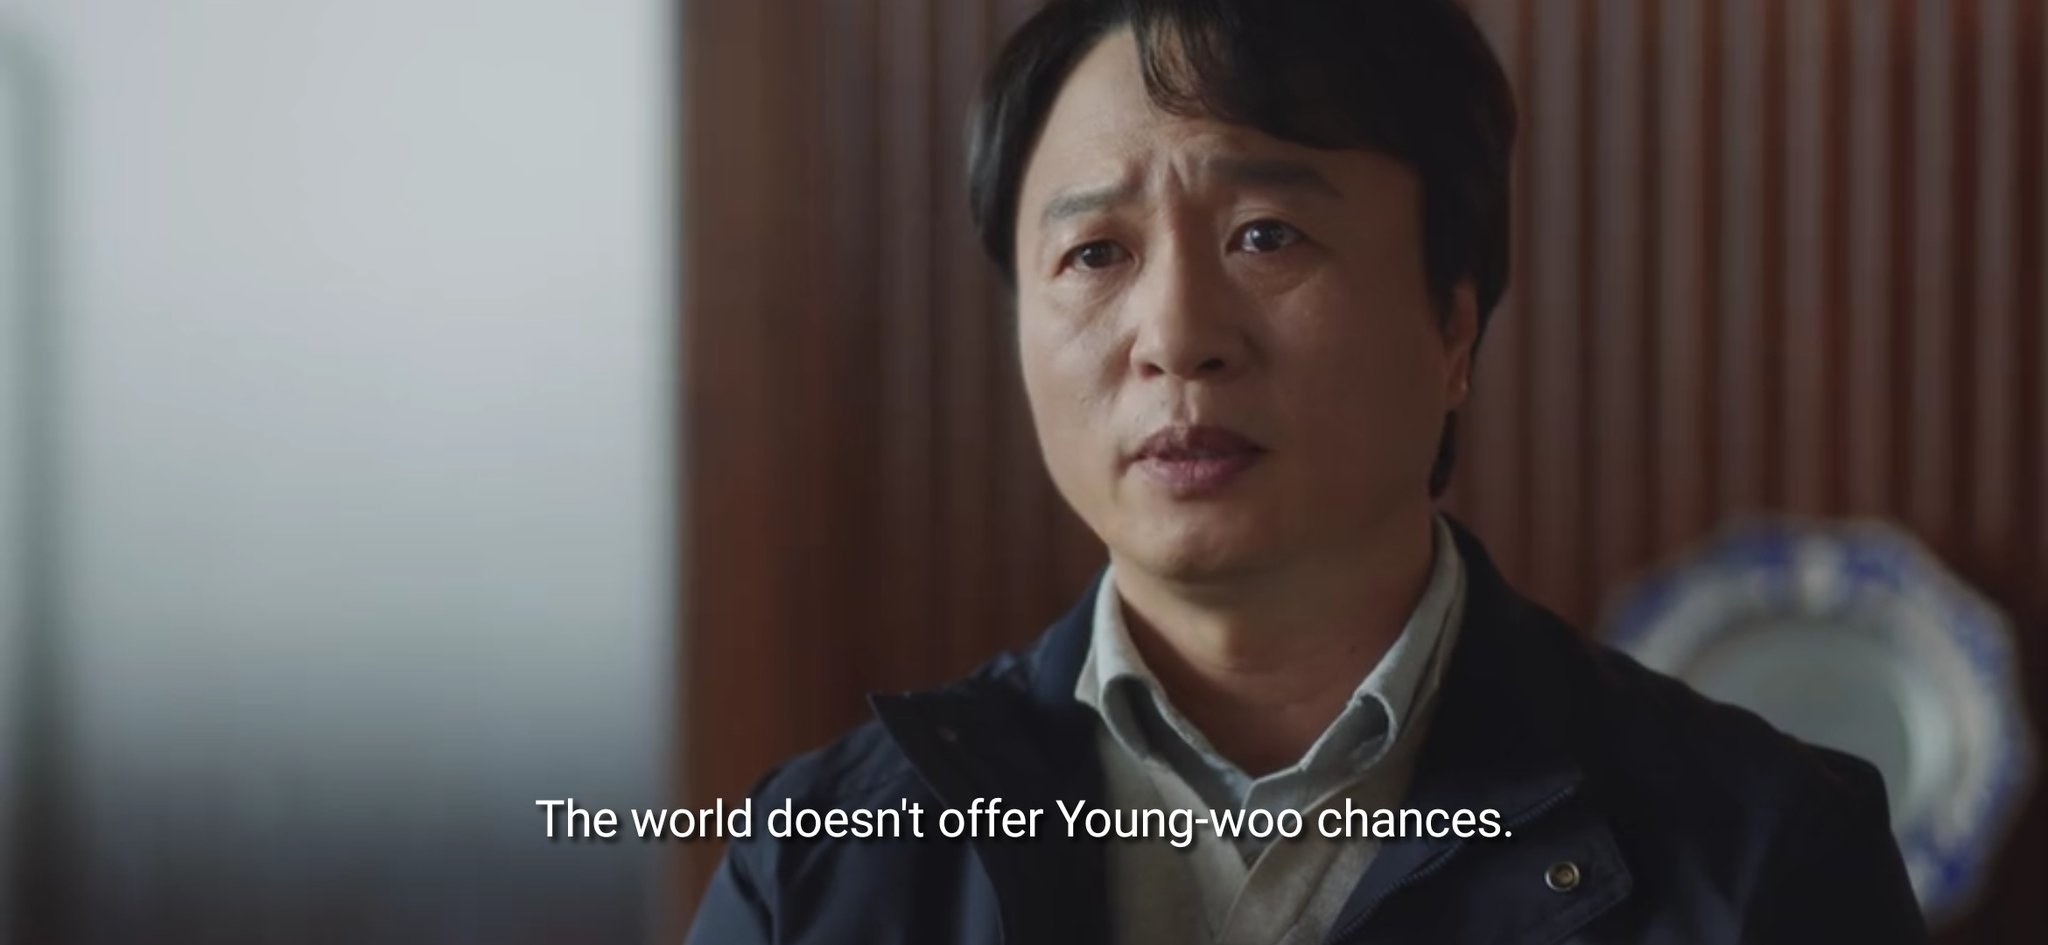 Young-woo&#x27;s dad getting emotional talking about his daughter